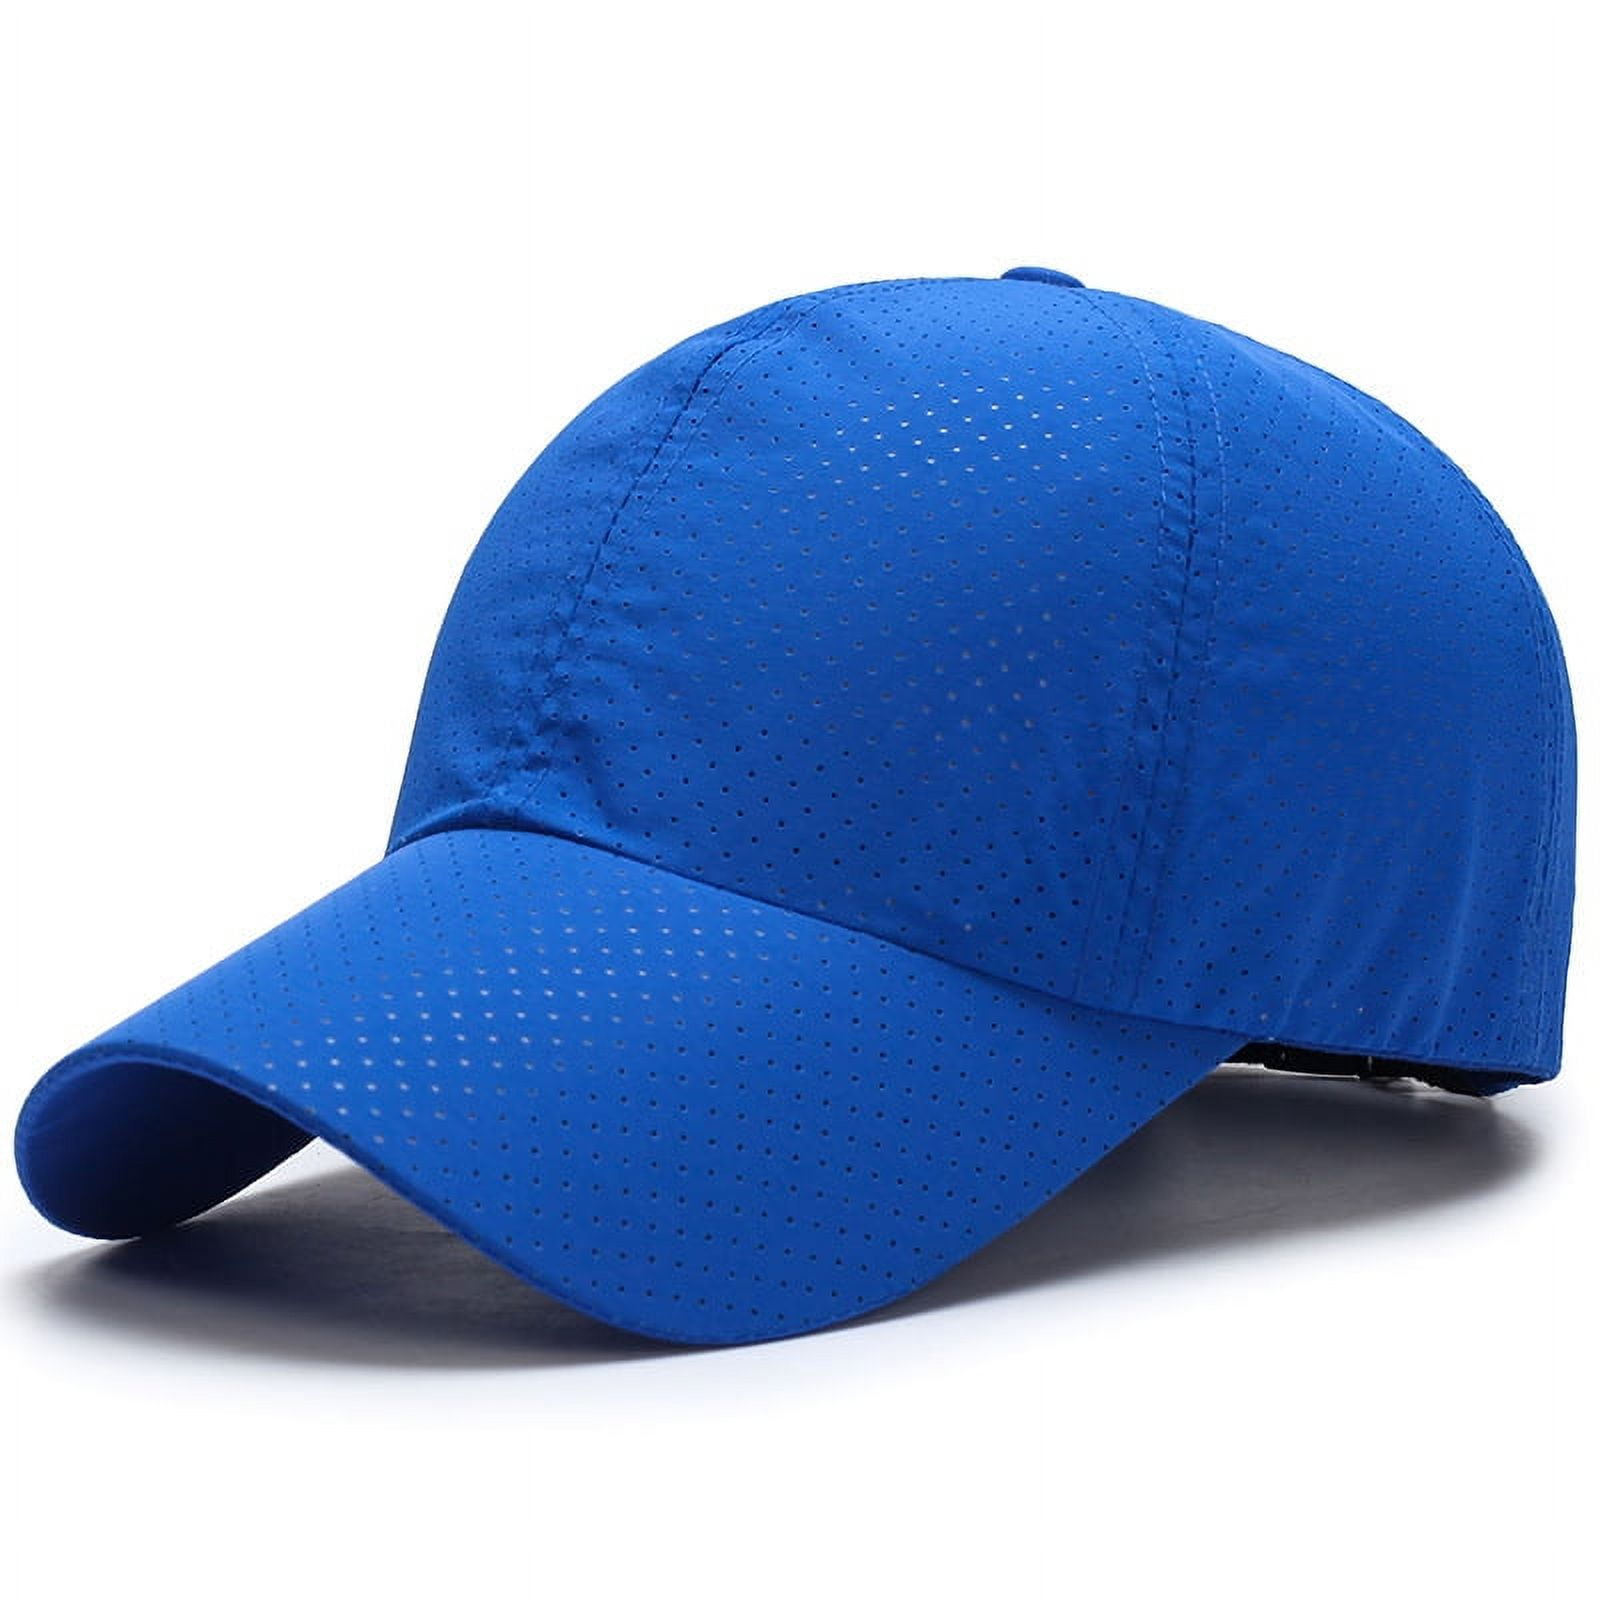 Unstructured Baseball Cap Quick Dry Sports Hat Lightweight Breathable